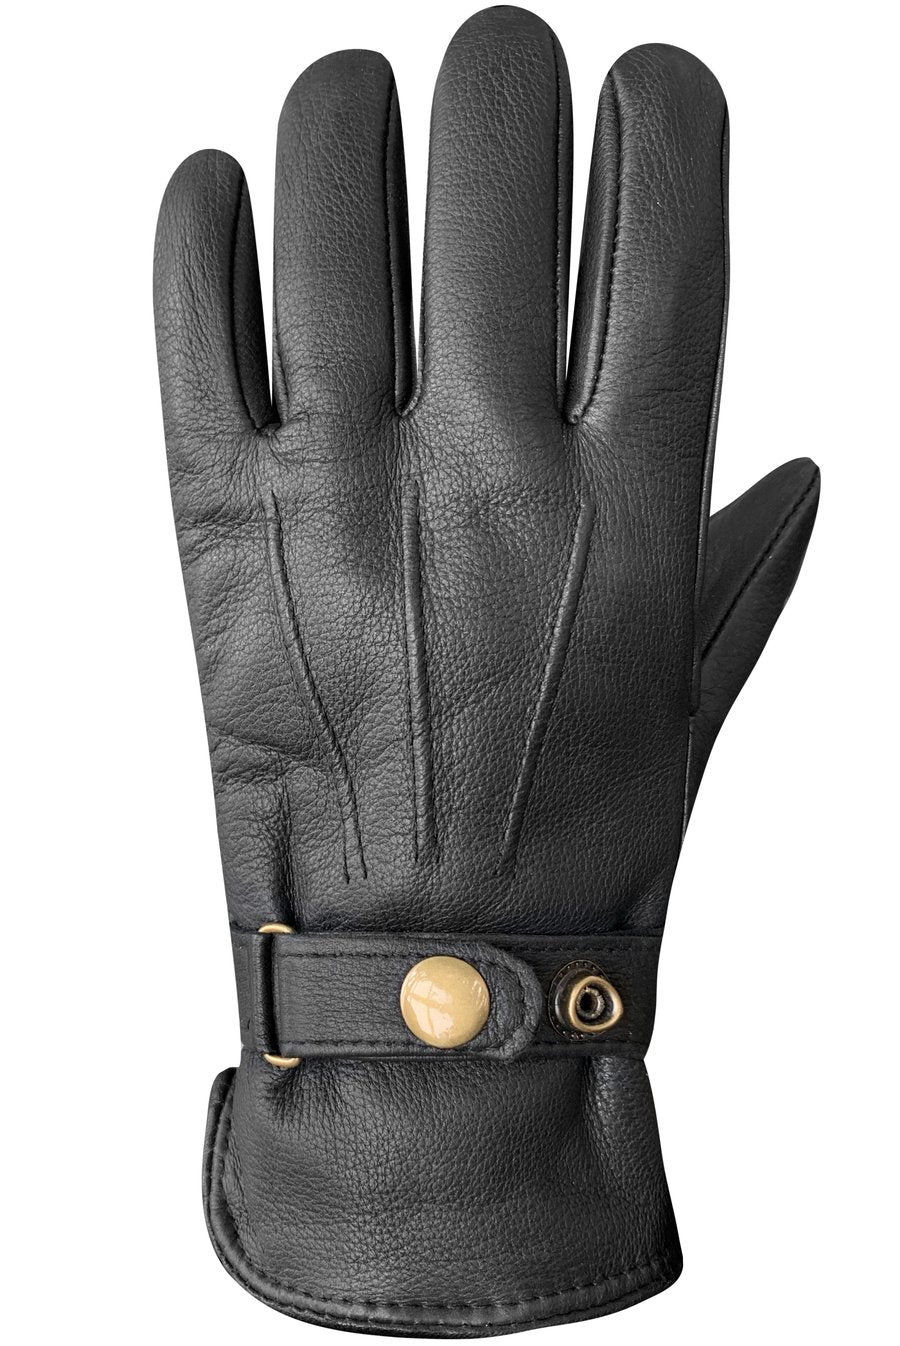 The Brody glove is made of deerskin with microfleece liner. 